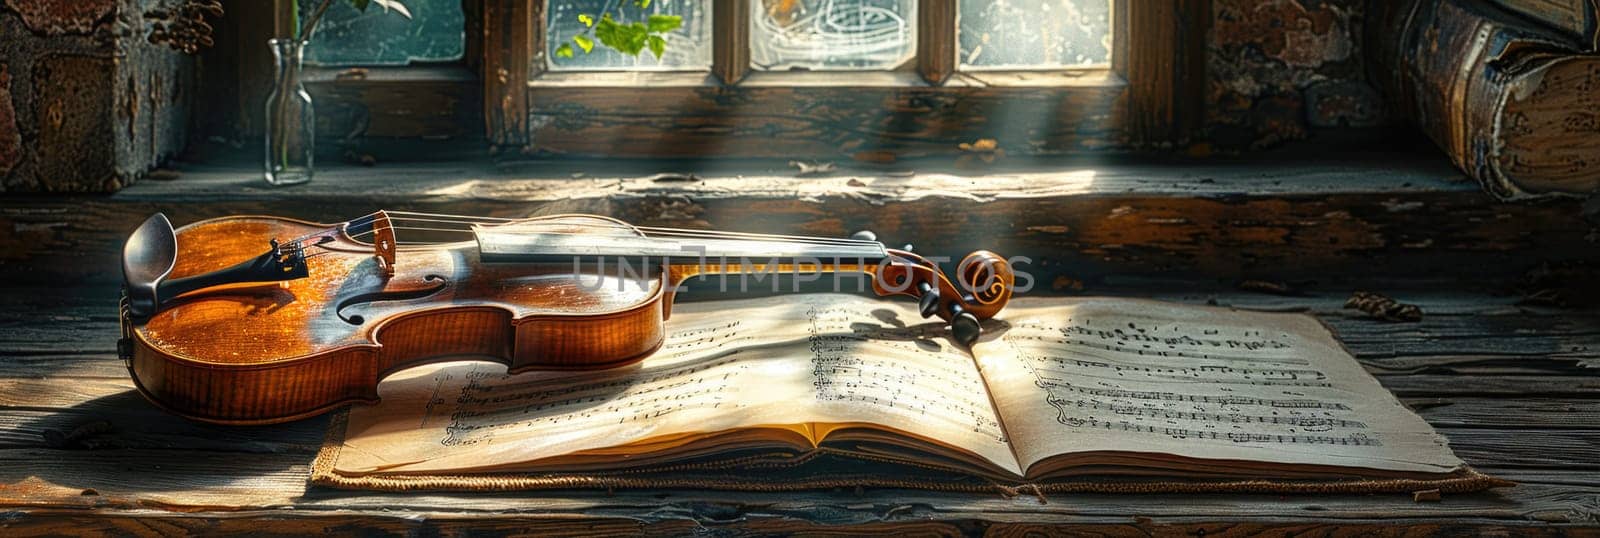 A violin is placed delicately on top of an open book, creating a harmonious scene.